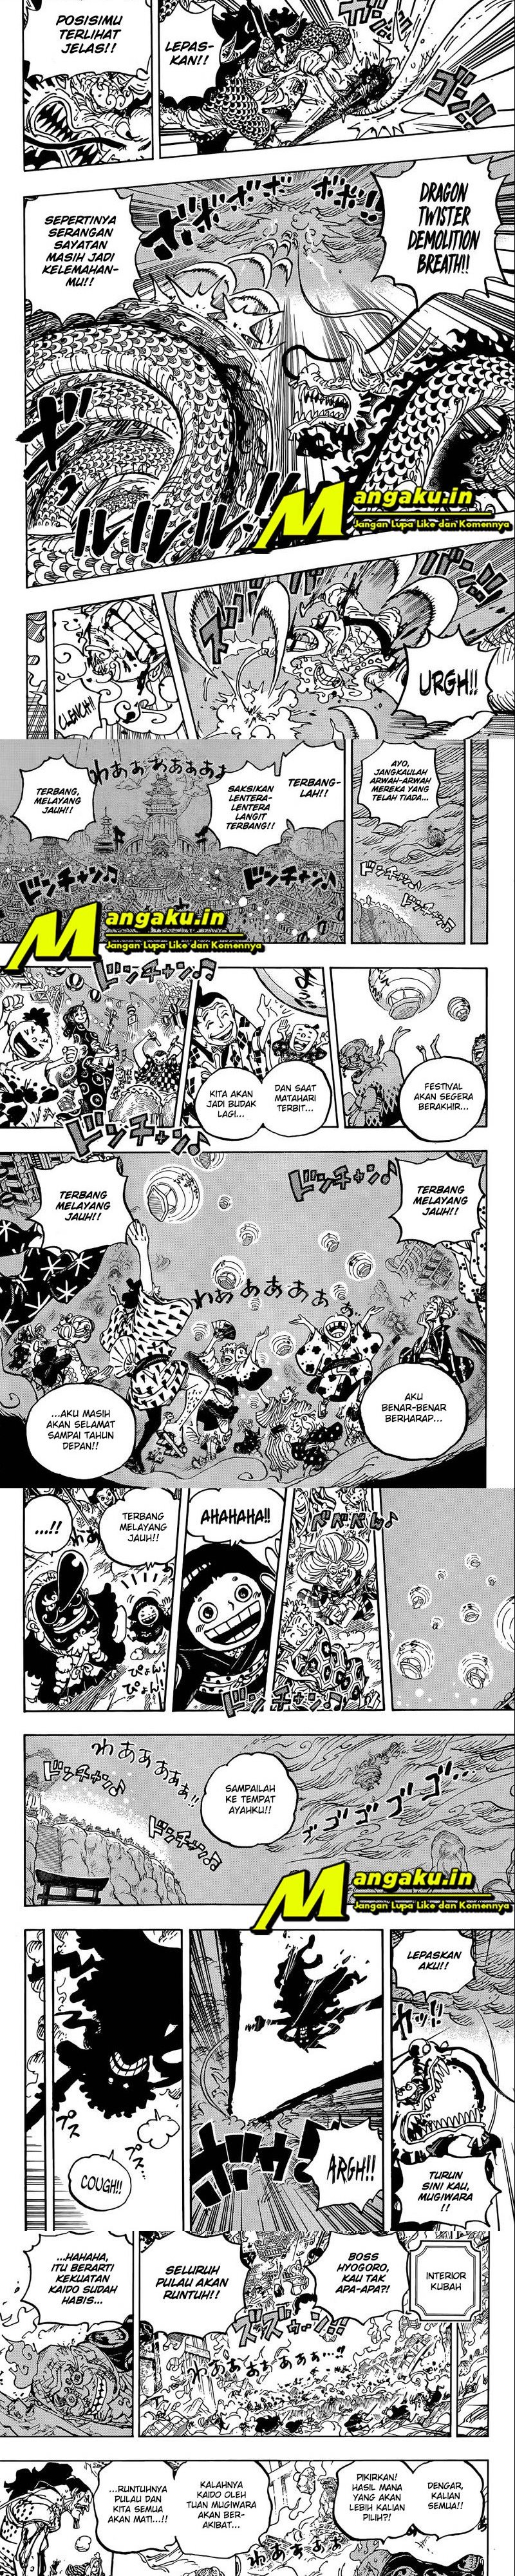 One Piece Chapter 1047 Hq - 67